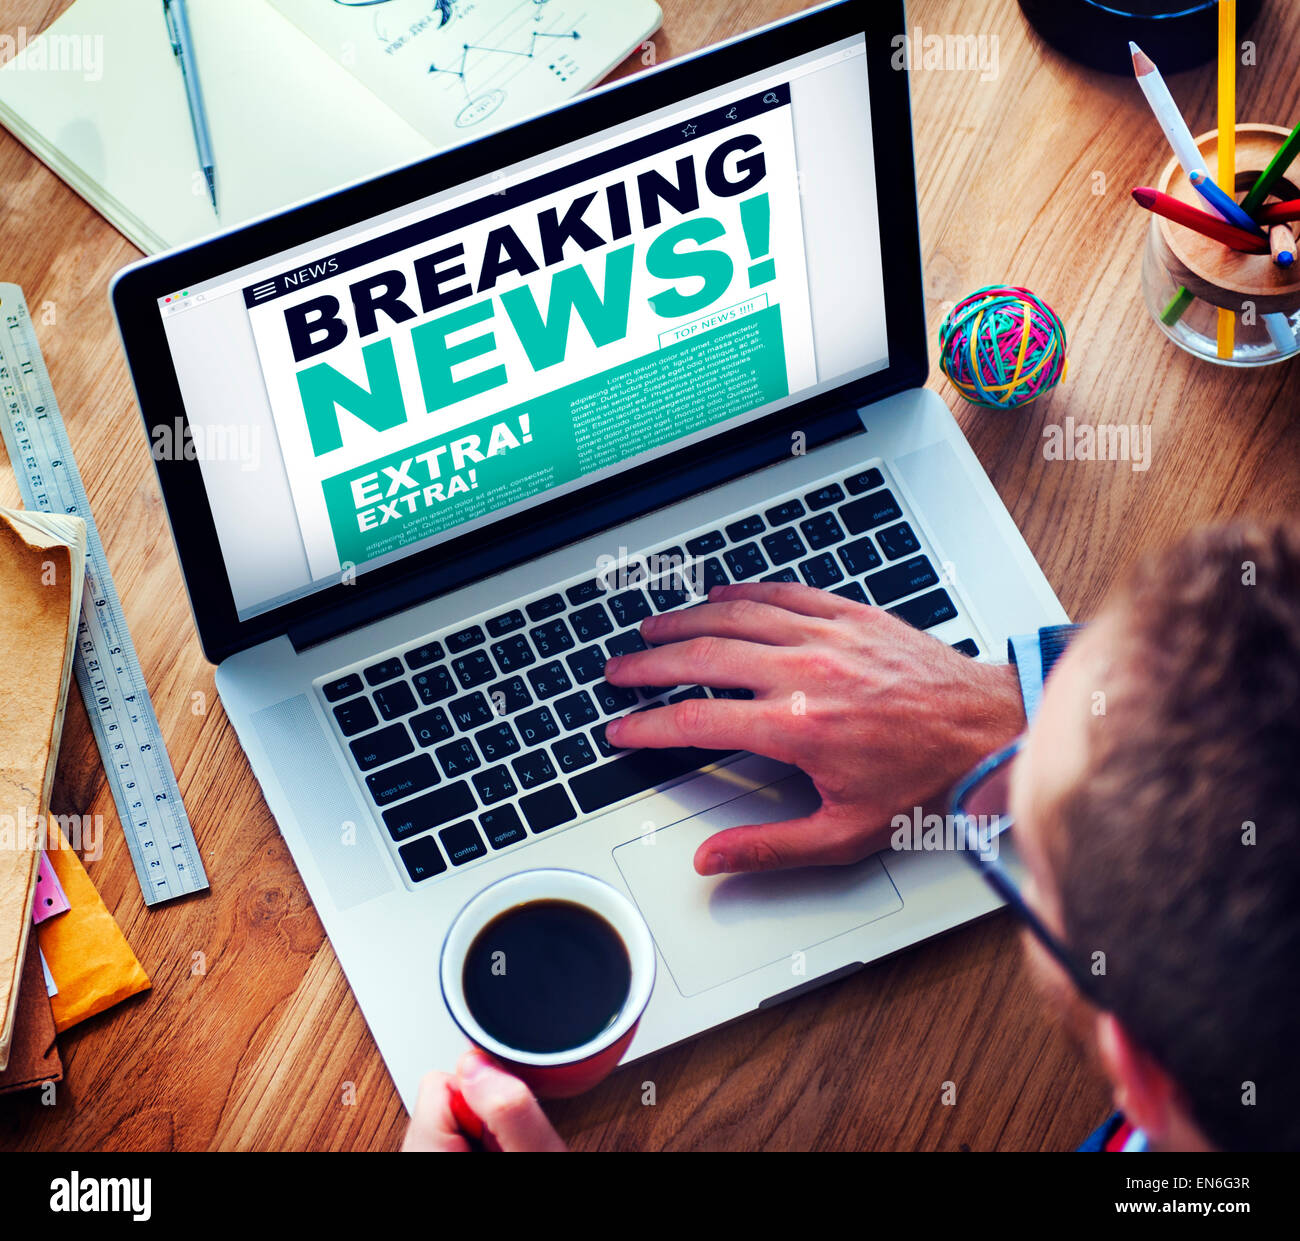 Man Breaking News Top Story Internet Connection Concept Stock Photo